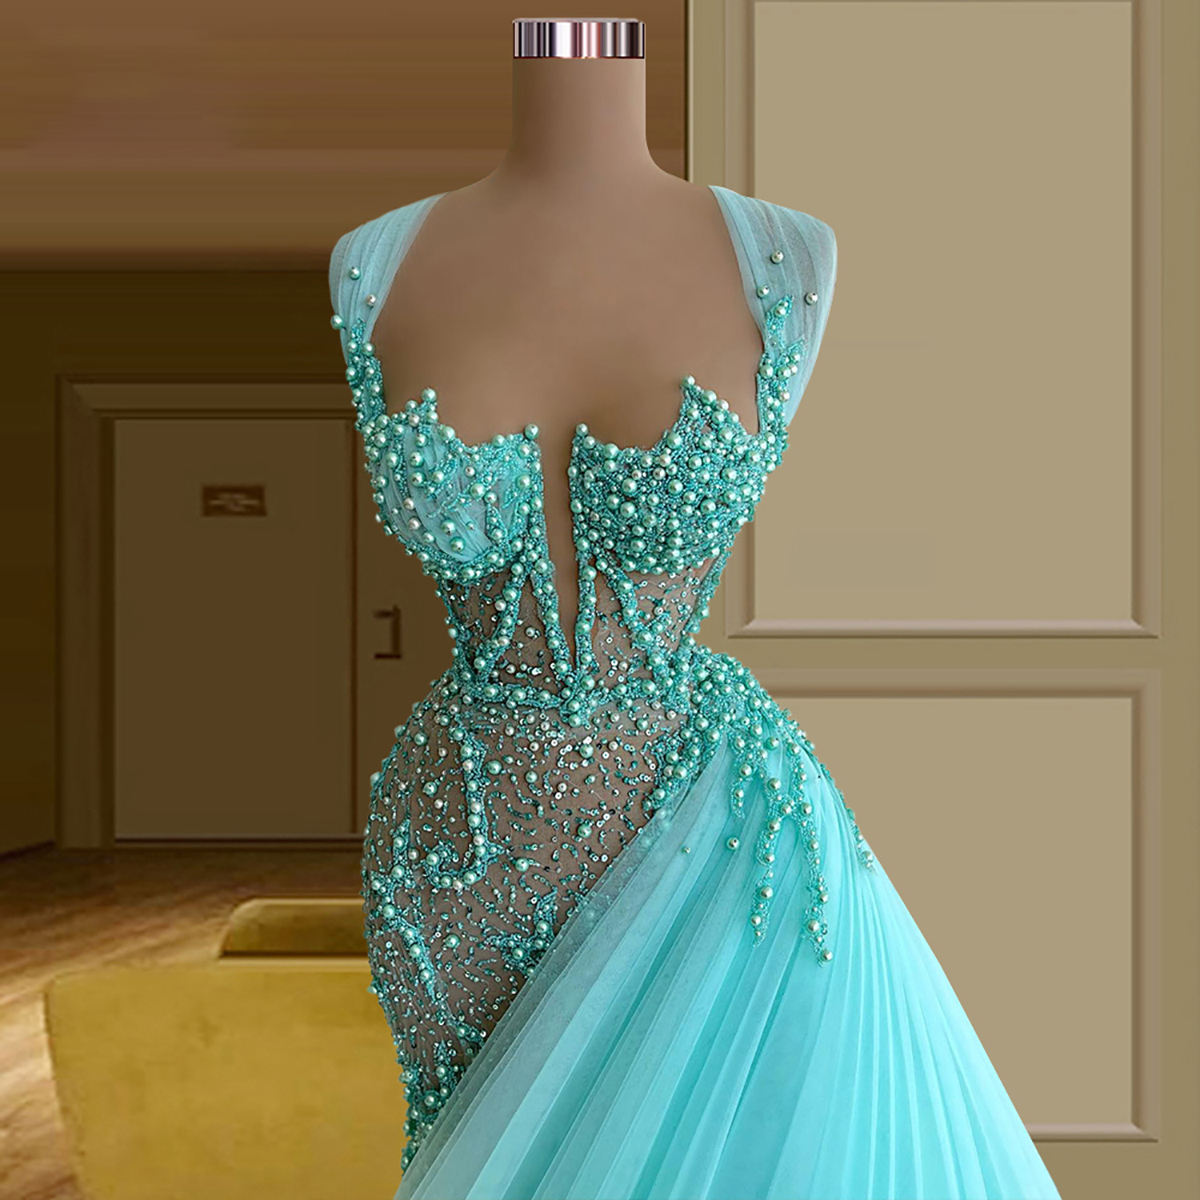 Blue Mermaid Evening Dresses Sleeveless V Neck Appliques Sequins Shiny Sexy Lace Beaded Floor Length Pearls Hollow Celebrity Plus Size Party Gowns Prom Dress